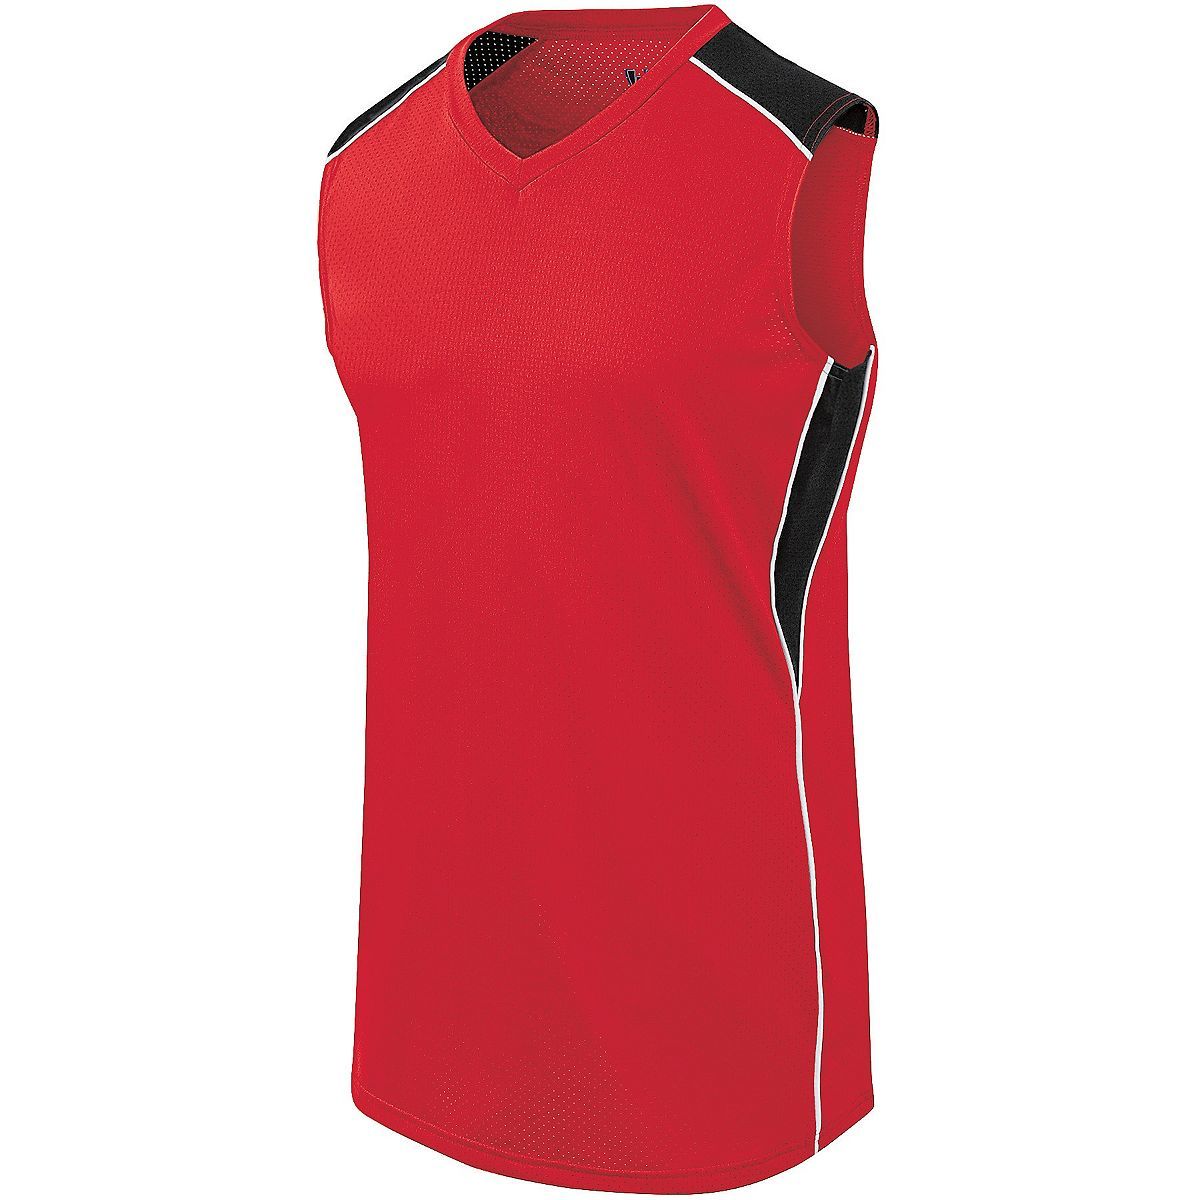 Augusta Sportswear Ladies Dynamite Jersey in Scarlet/Black/White  -Part of the Ladies, Ladies-Jersey, Augusta-Products, Softball, Shirts product lines at KanaleyCreations.com